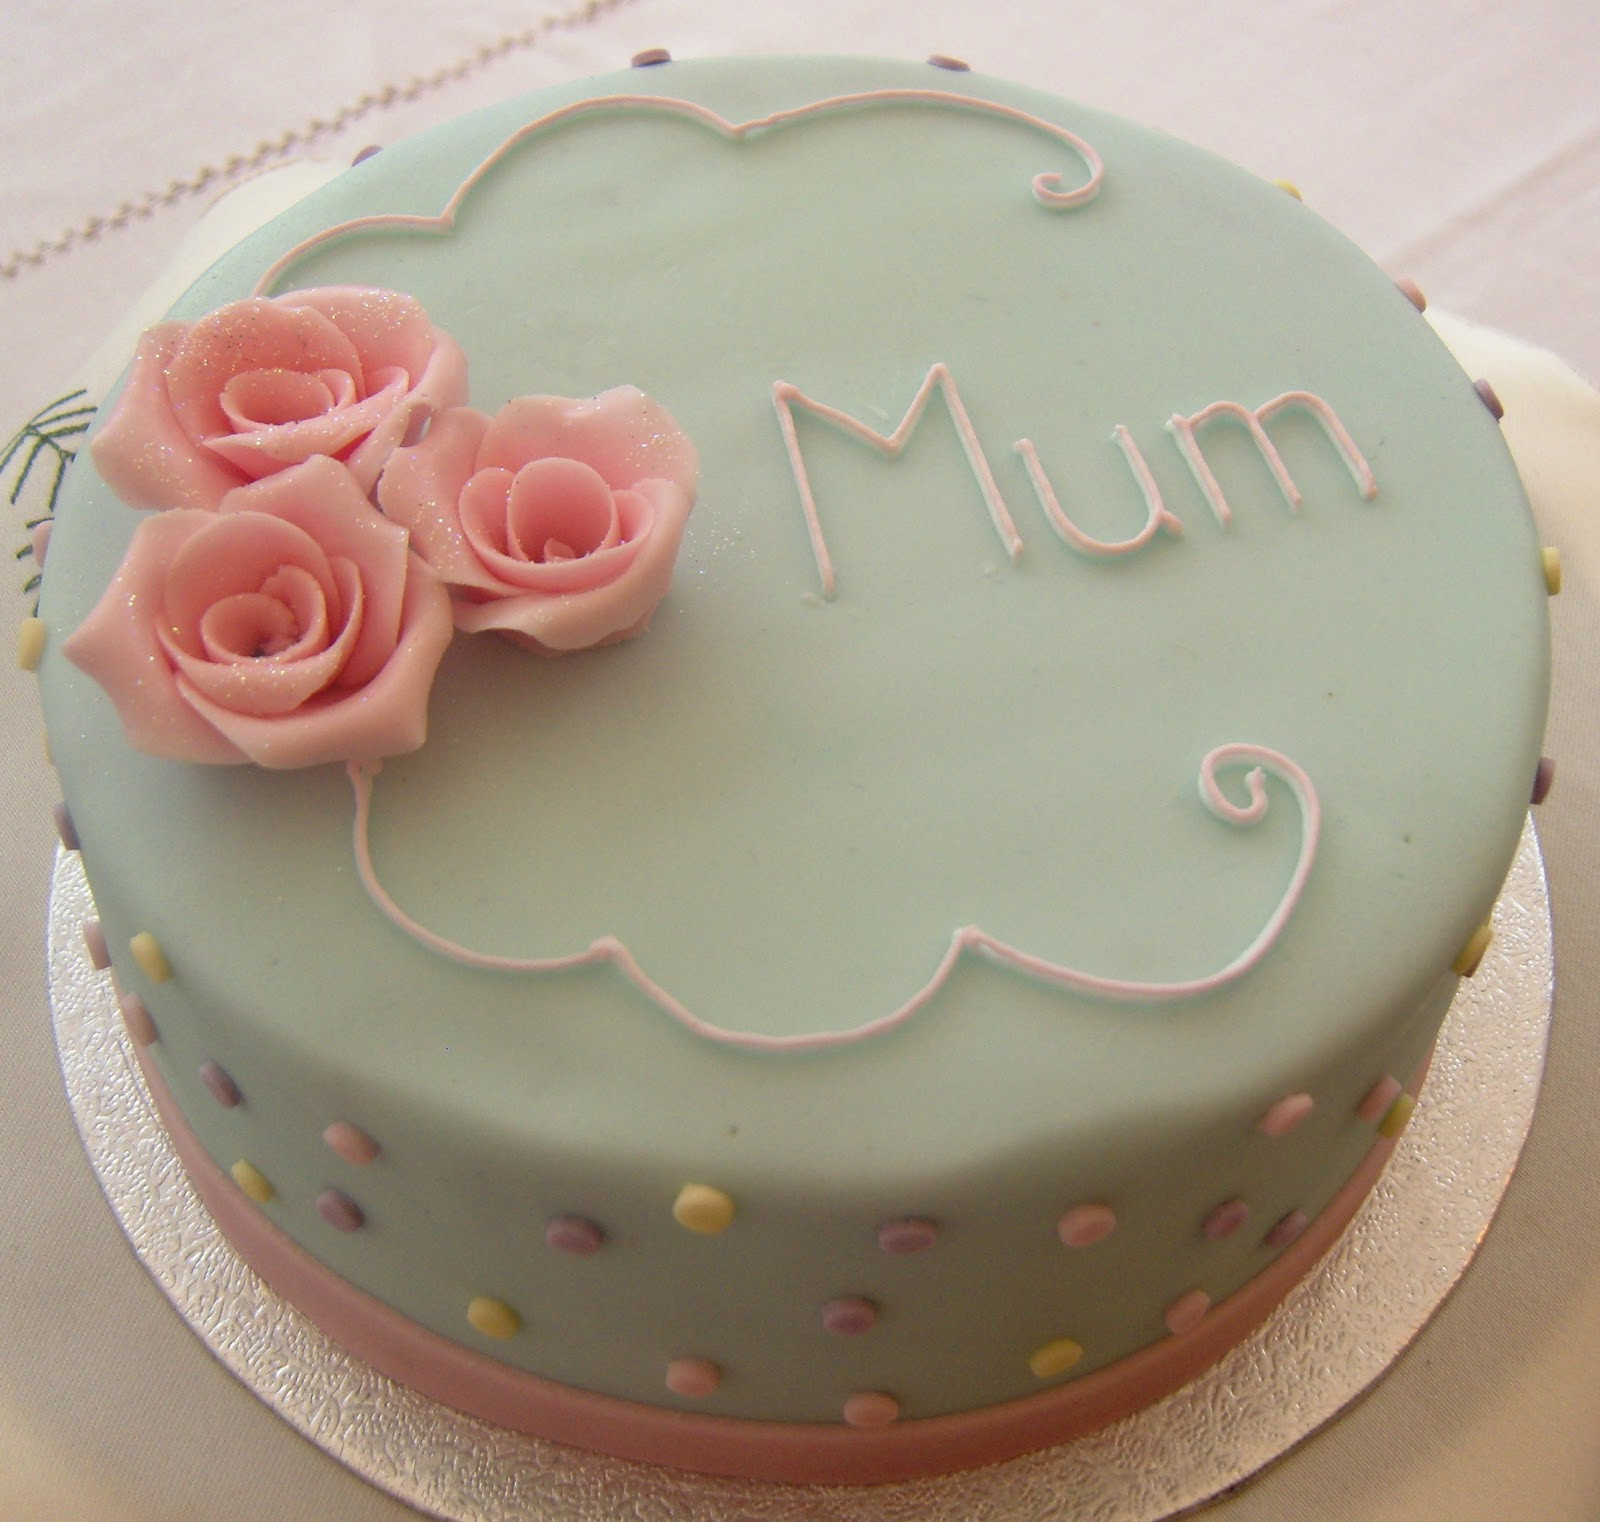 Birthday Cake Ideas For Mom
 Order Cake For Mom line Buy and Send Cake For Mom from